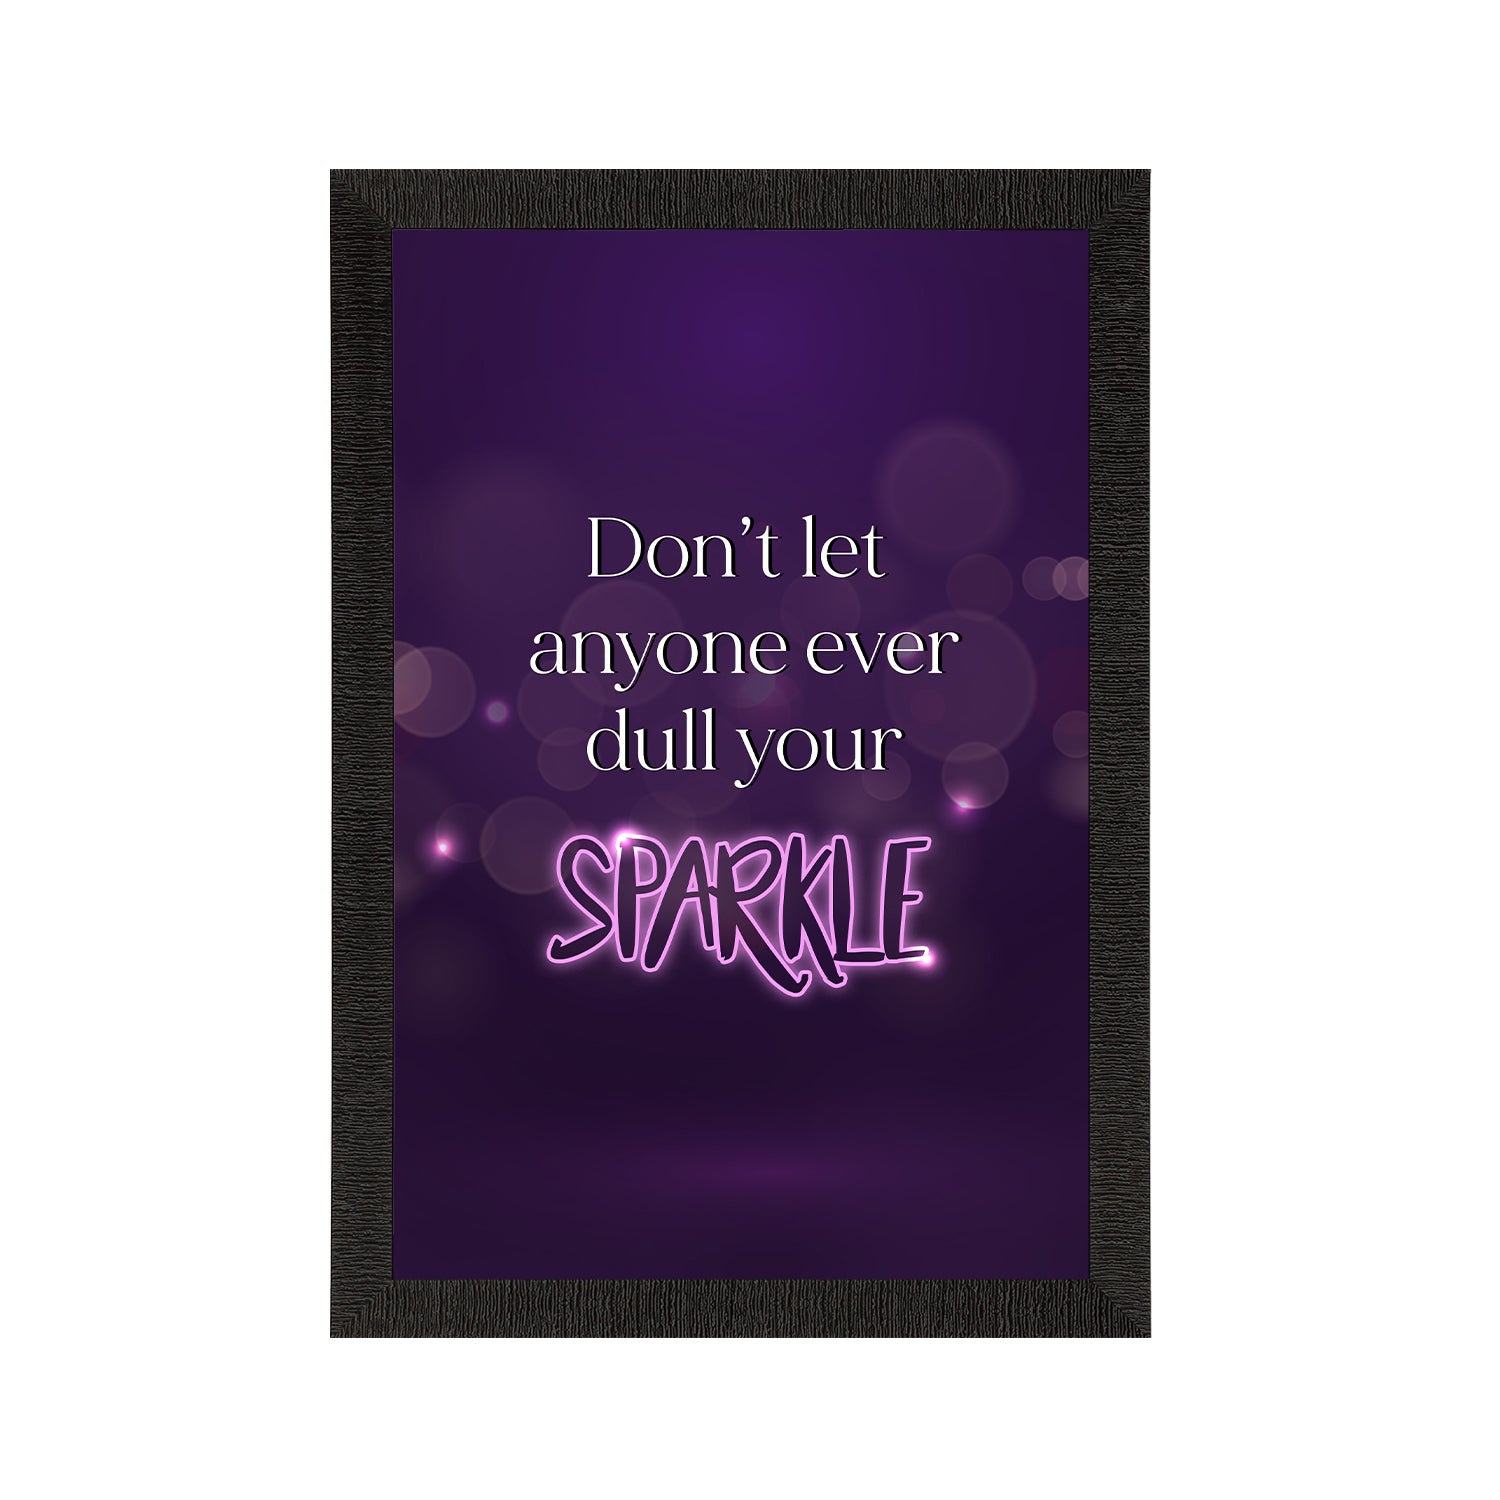 "Don't let anyone ever dull your Sparkle" Motivational Quote Satin Matt Texture UV Art Painting